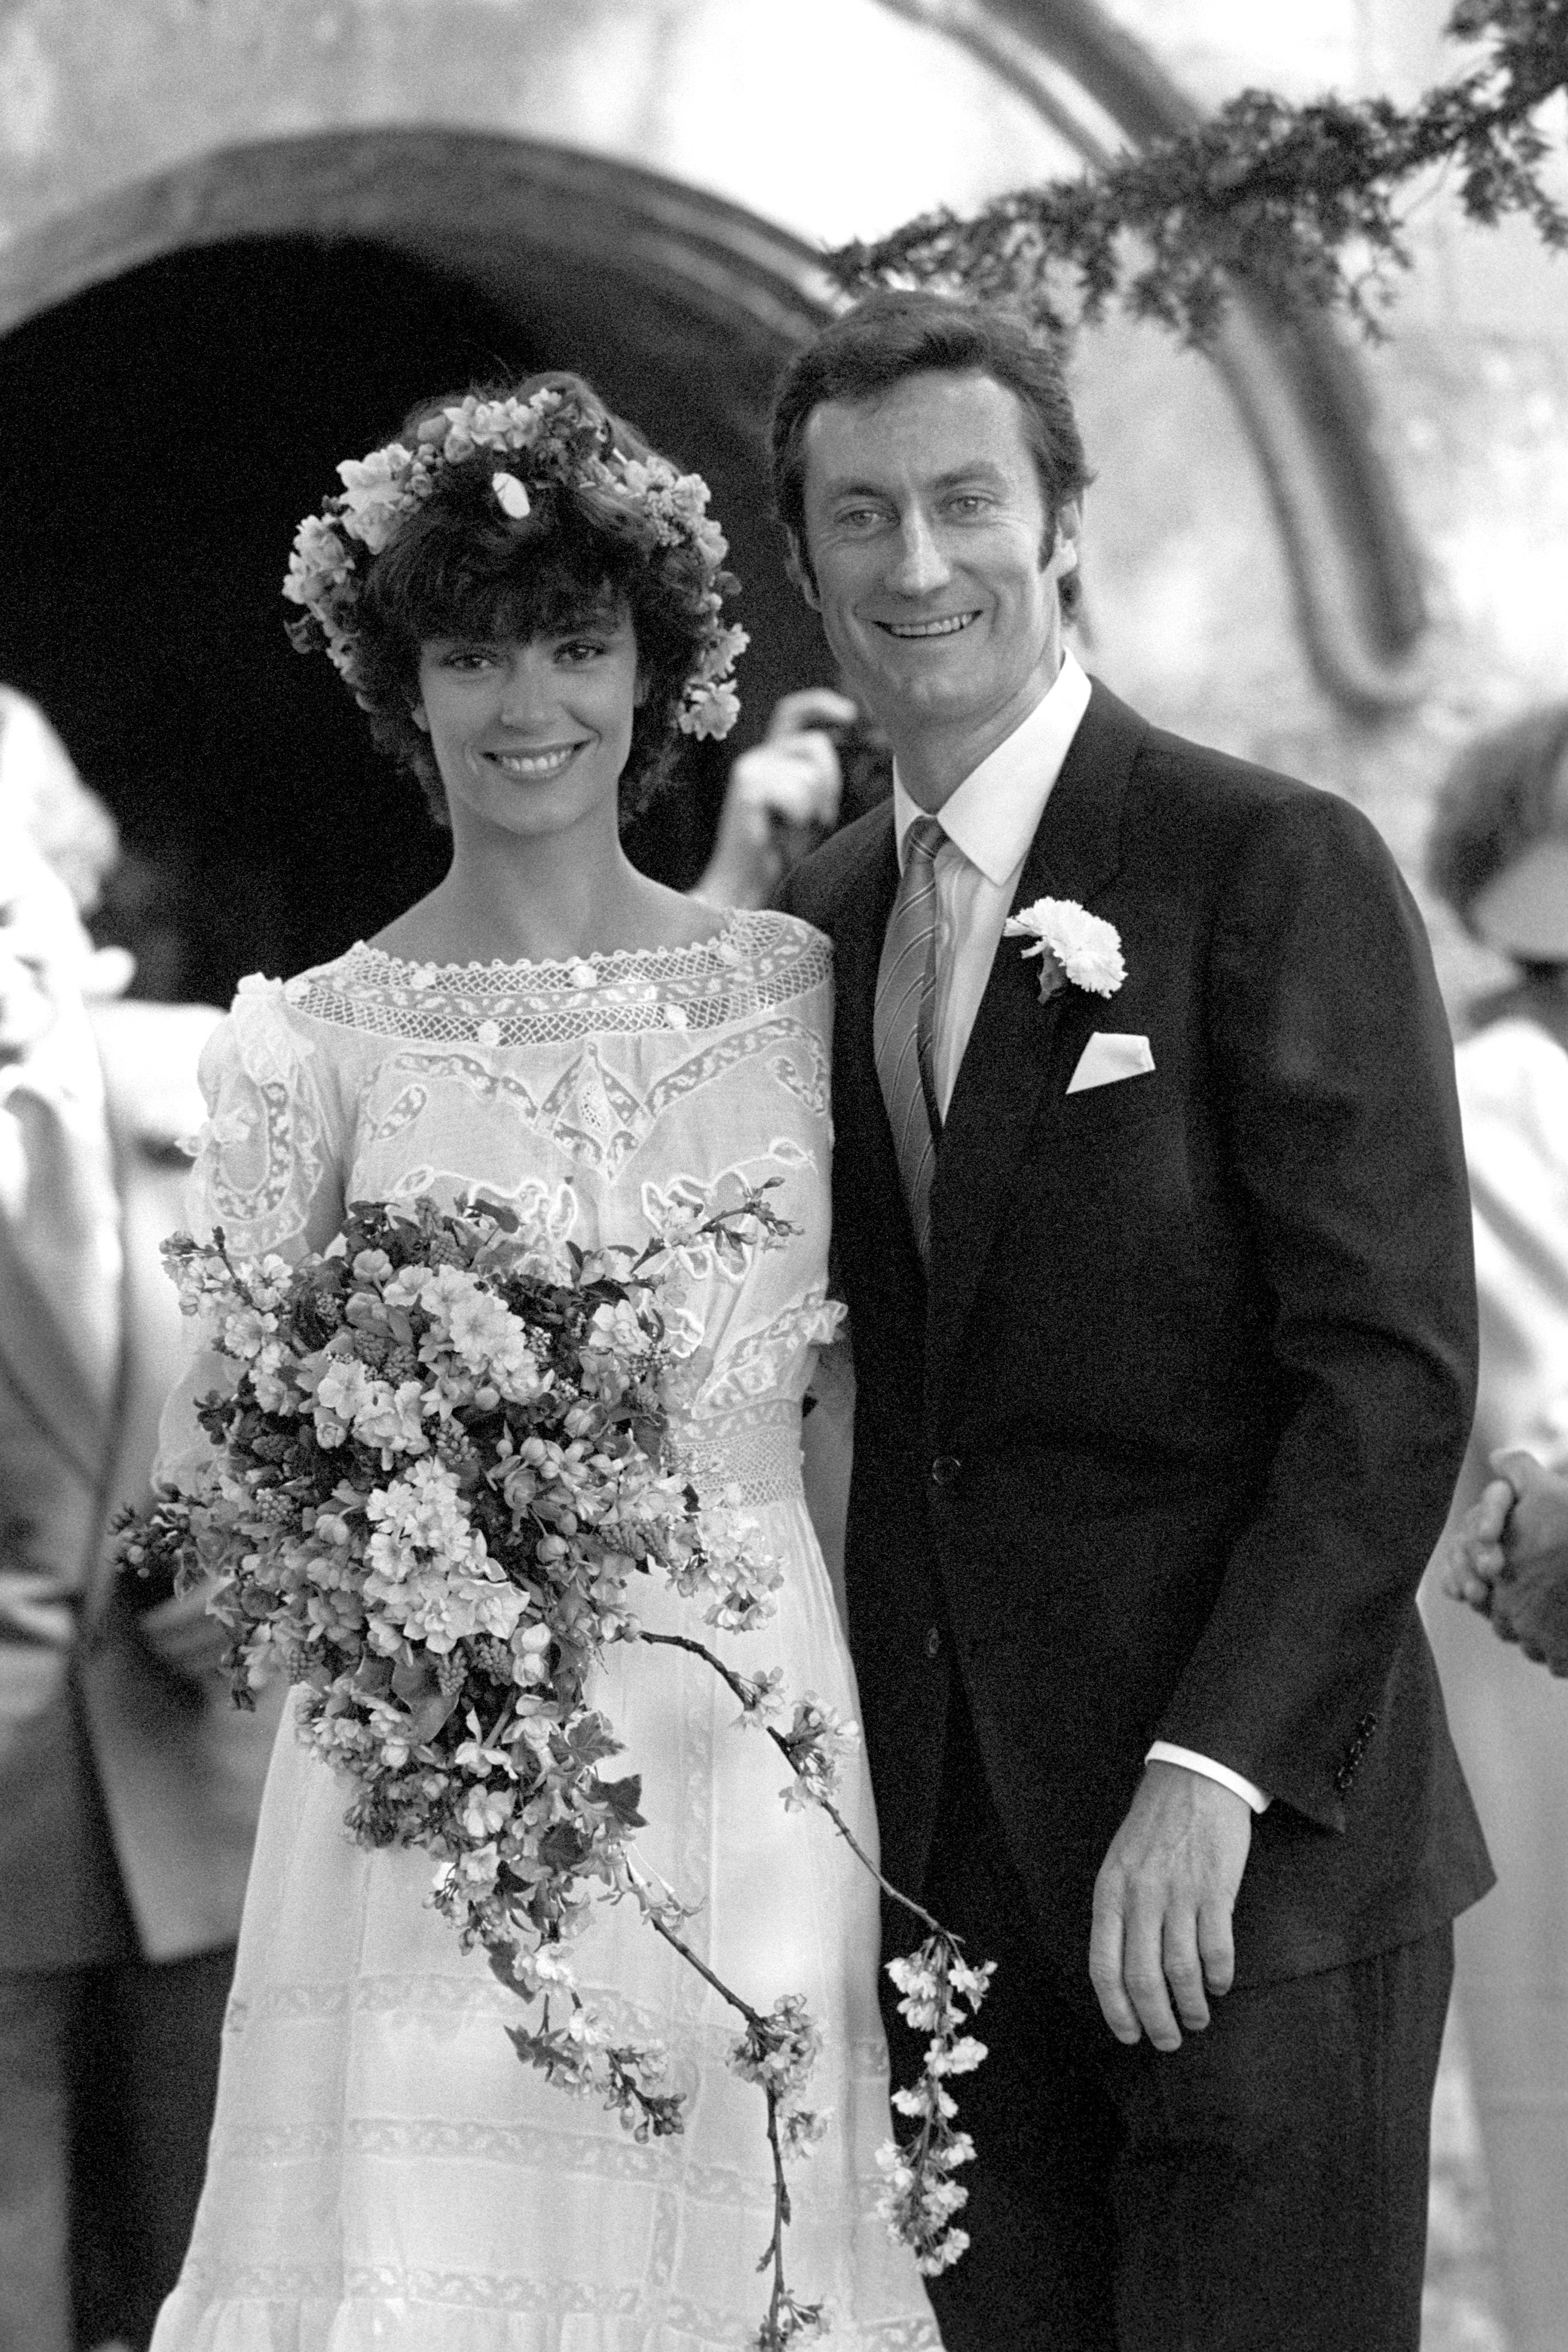 Actress Rachel Ward and Australian actor Bryan Brown at their wedding at Ward's father's estate; Cornwell Manor, near Chipping Norton, Oxfordshire. | Source: Getty Images